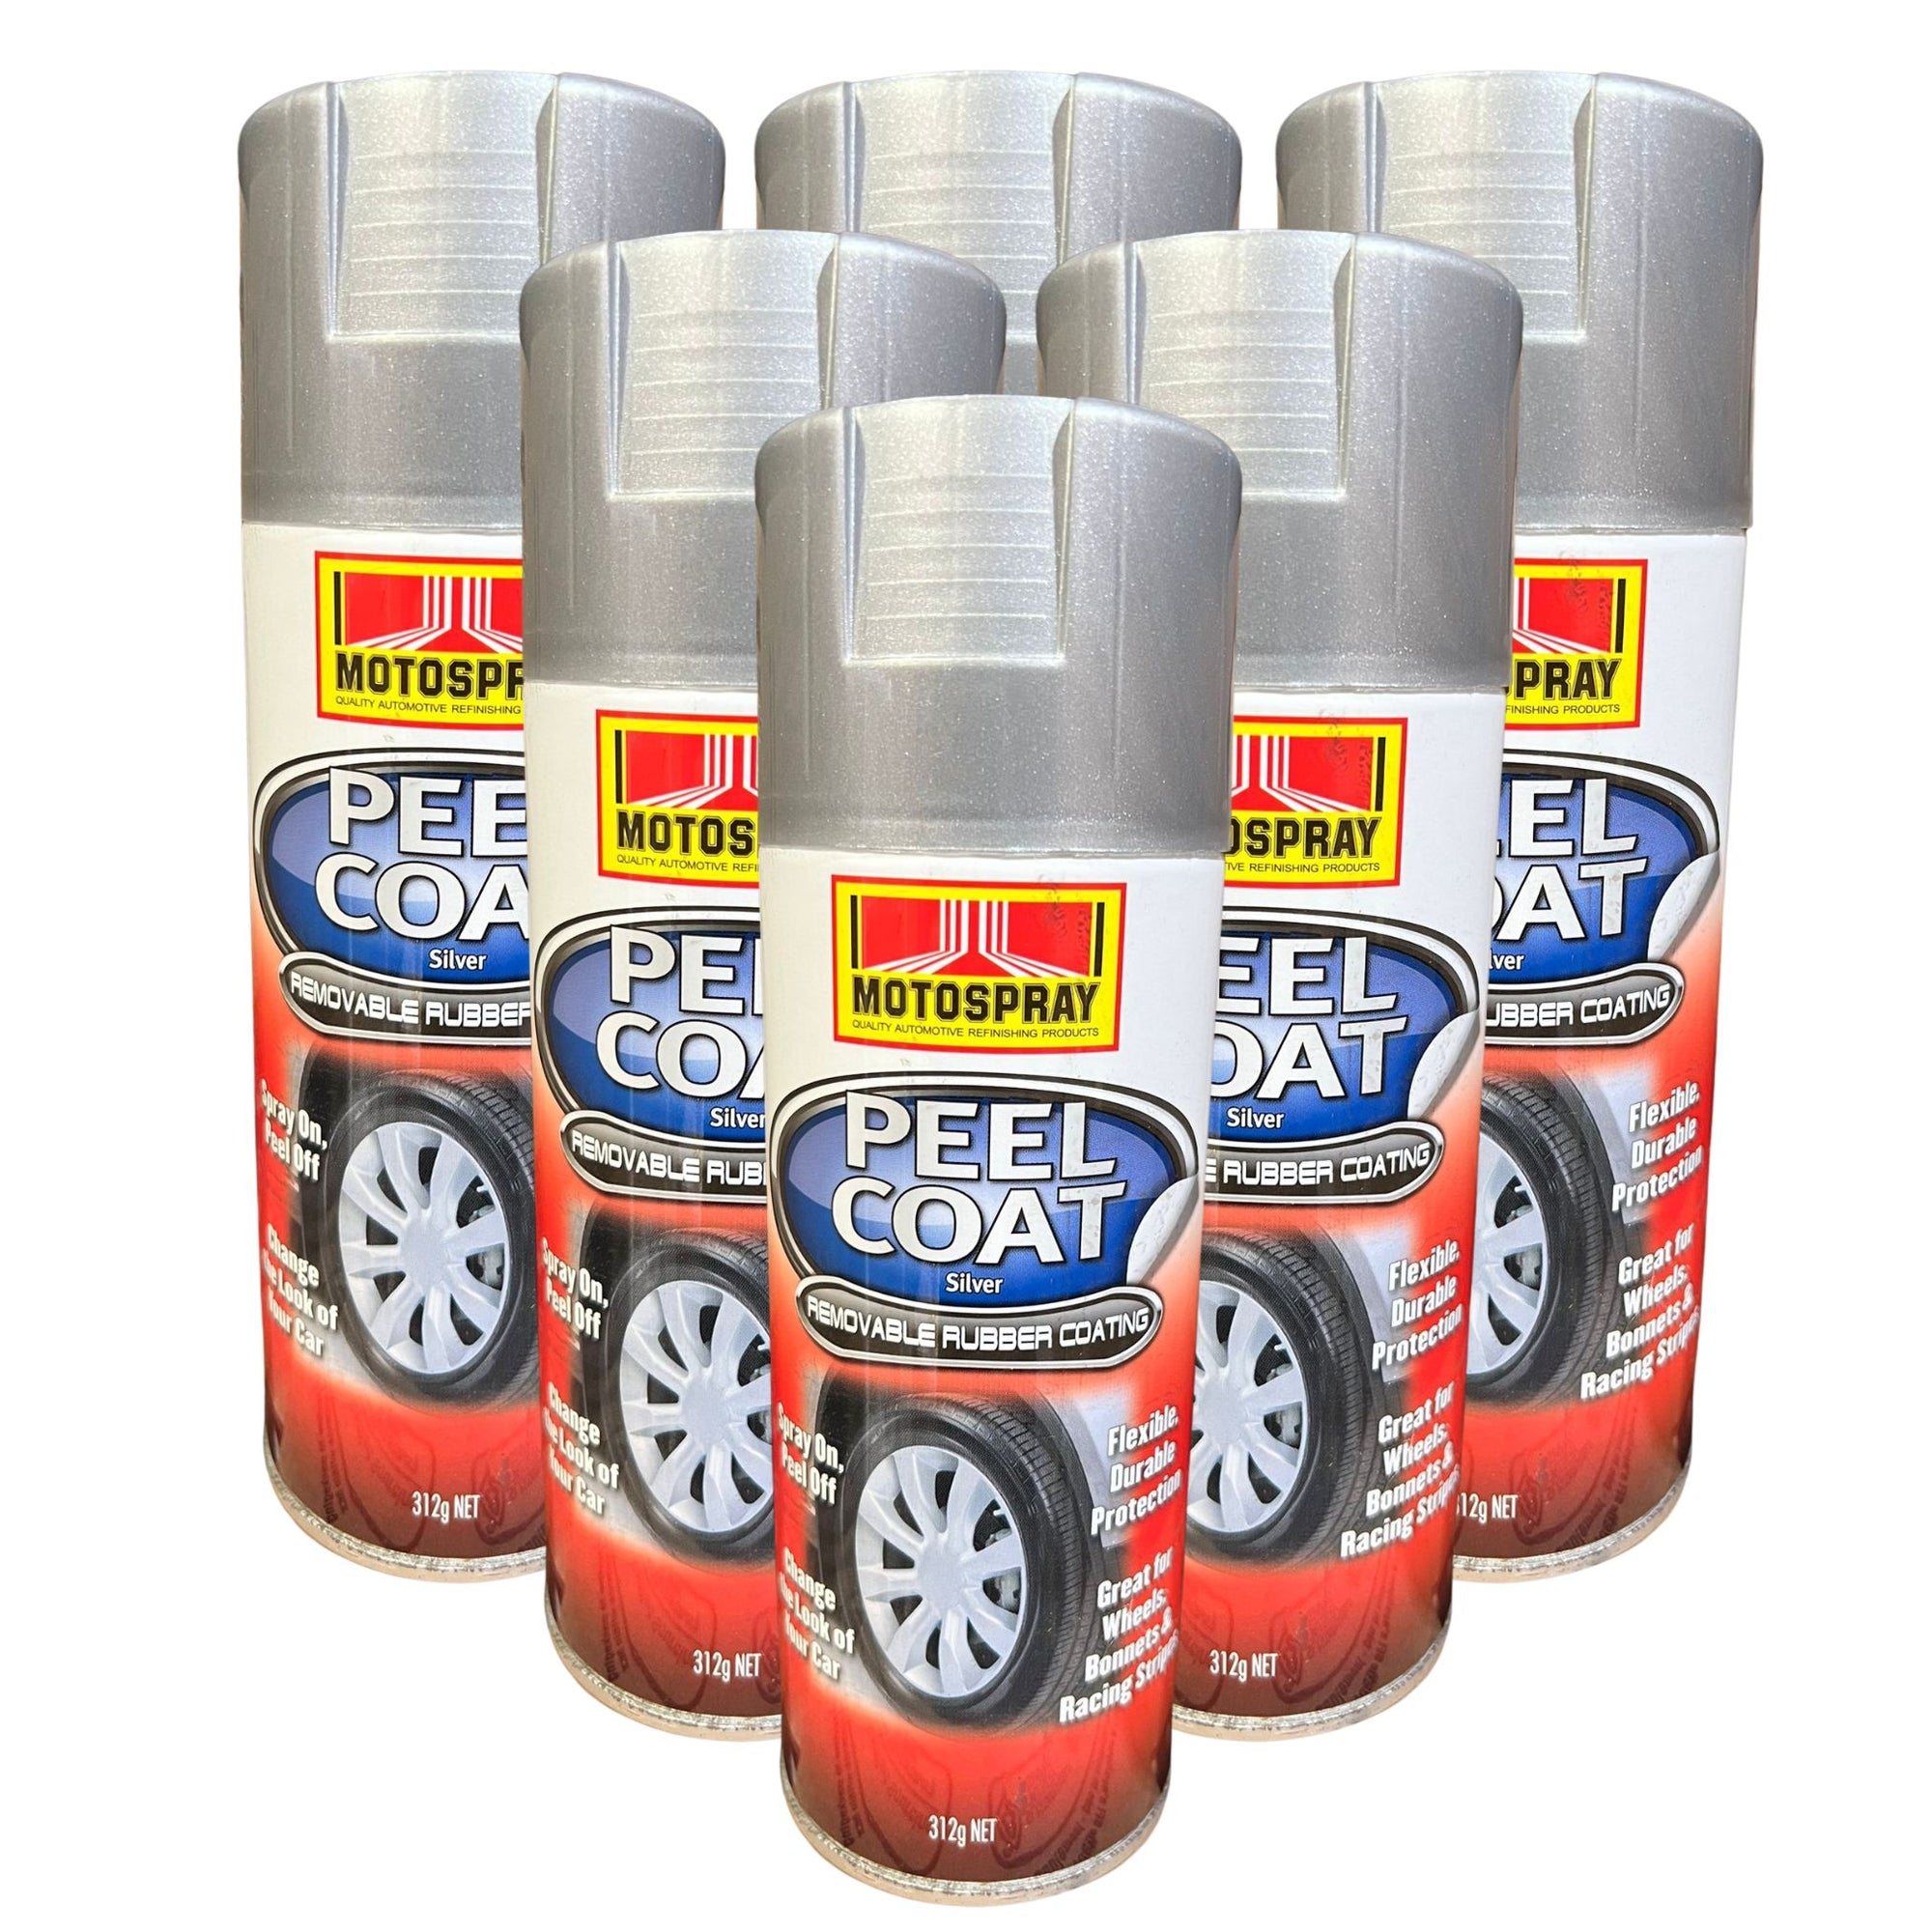 Motospray Peel Coat Rubberized Removable Coating - Silver  - 6 Pack - South East Clearance Centre